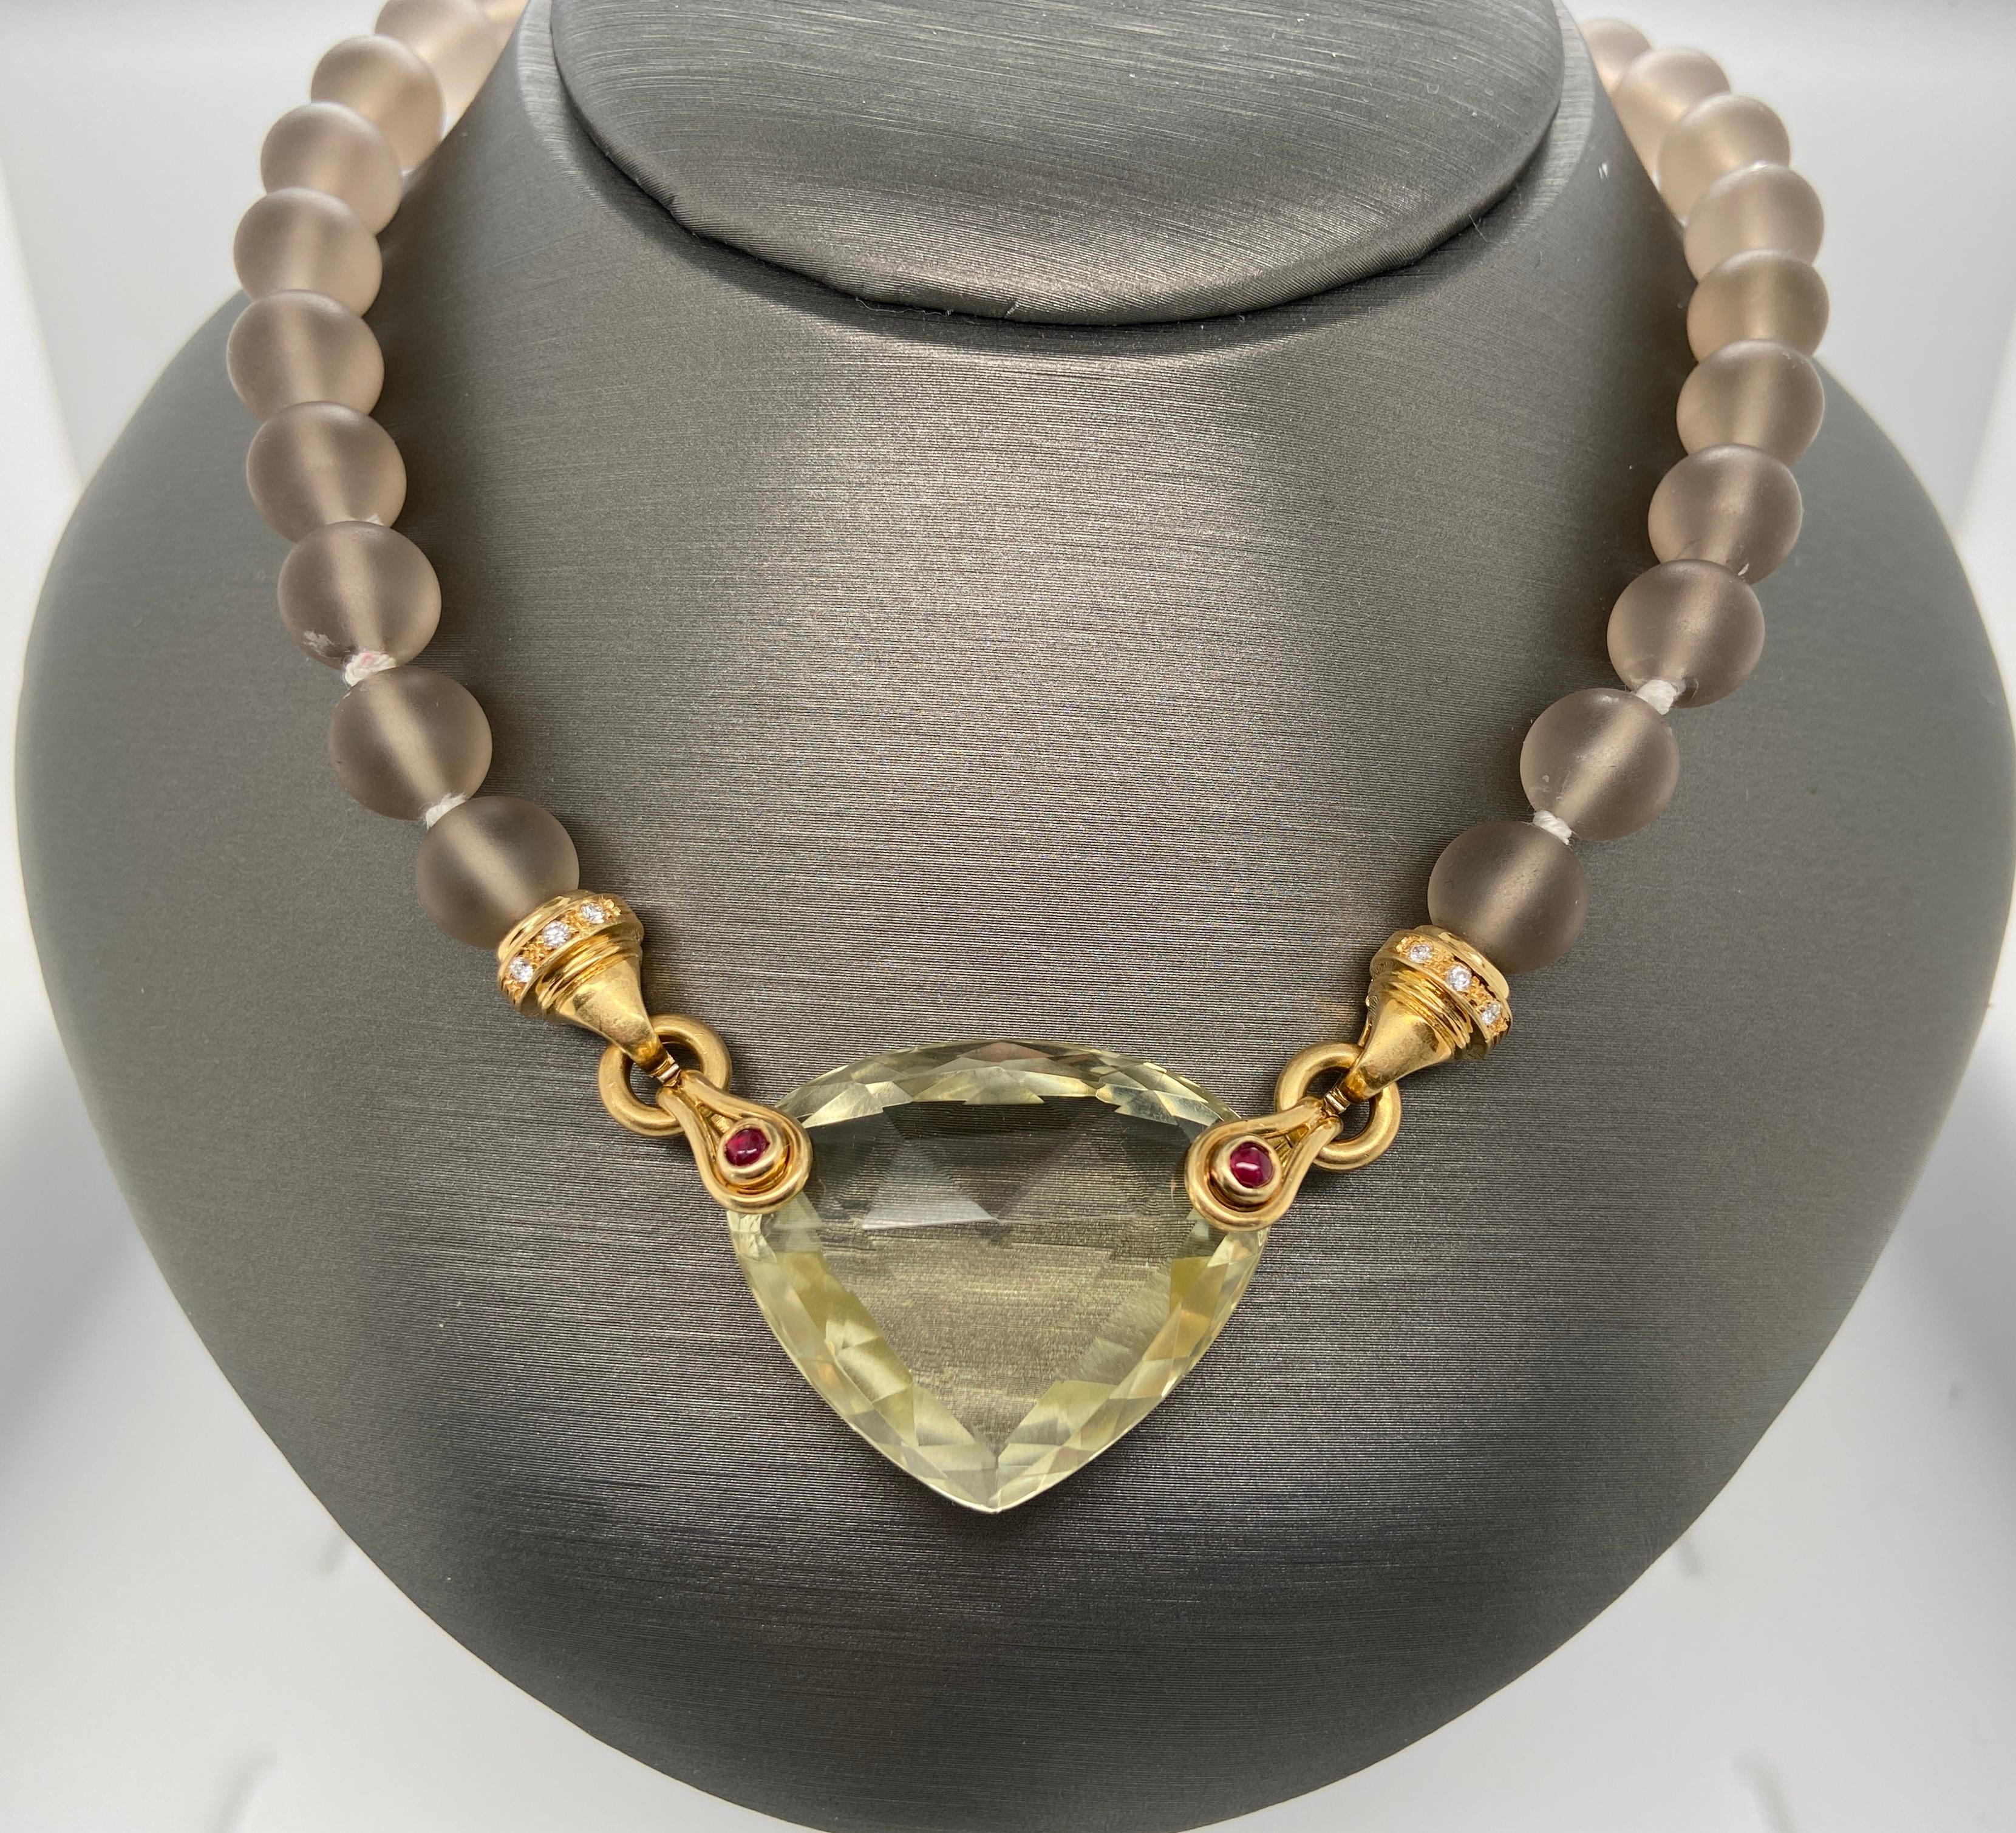 This incredible necklace is exceptional in its make and composition. At the center of the necklace is a citrine weighing approximately 60cts, mounted on each side with stirrup-shaped gold, accented on each side by cabochon-cut, bezel-set rubies